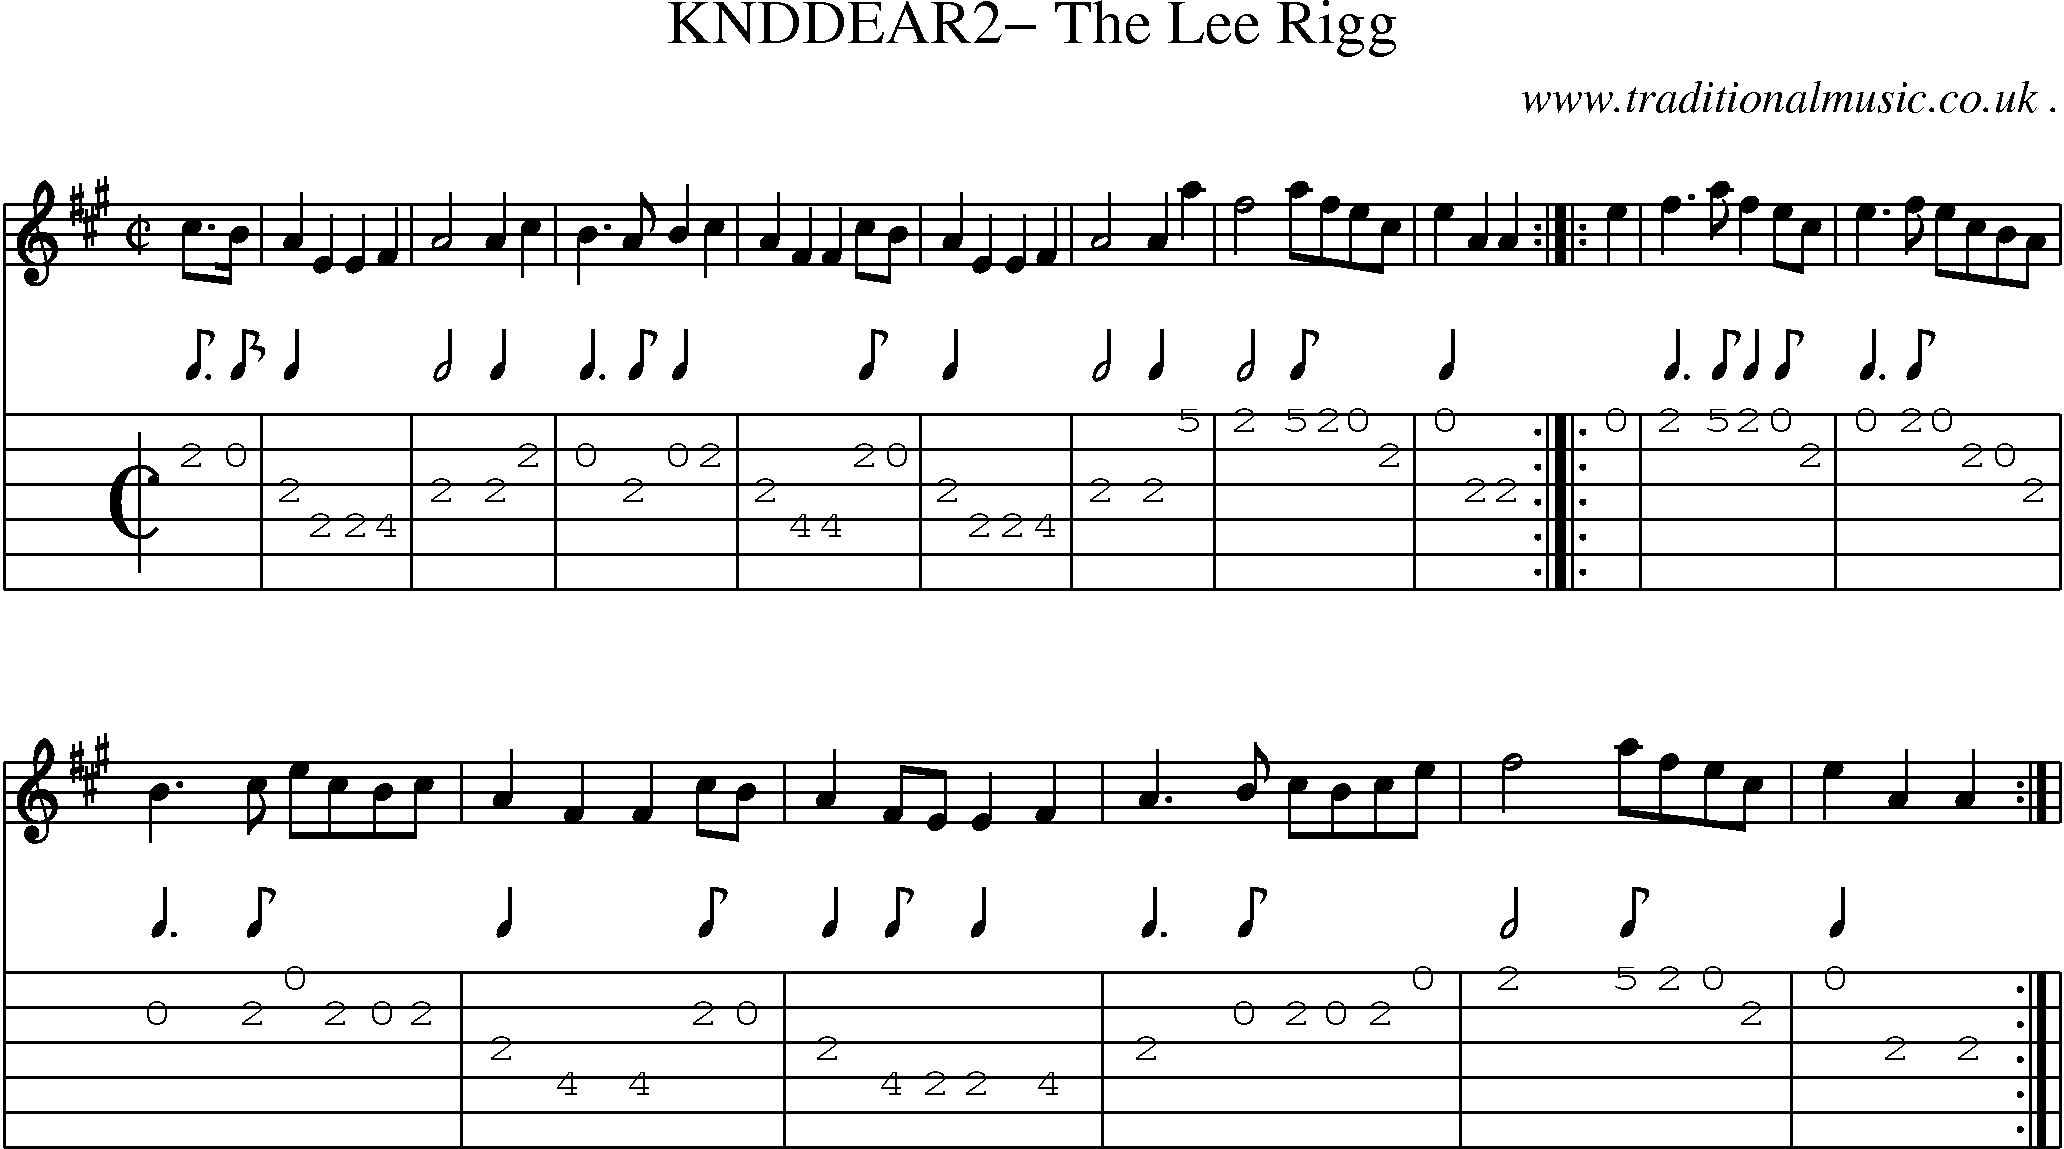 Sheet-Music and Guitar Tabs for Knddear2 The Lee Rigg